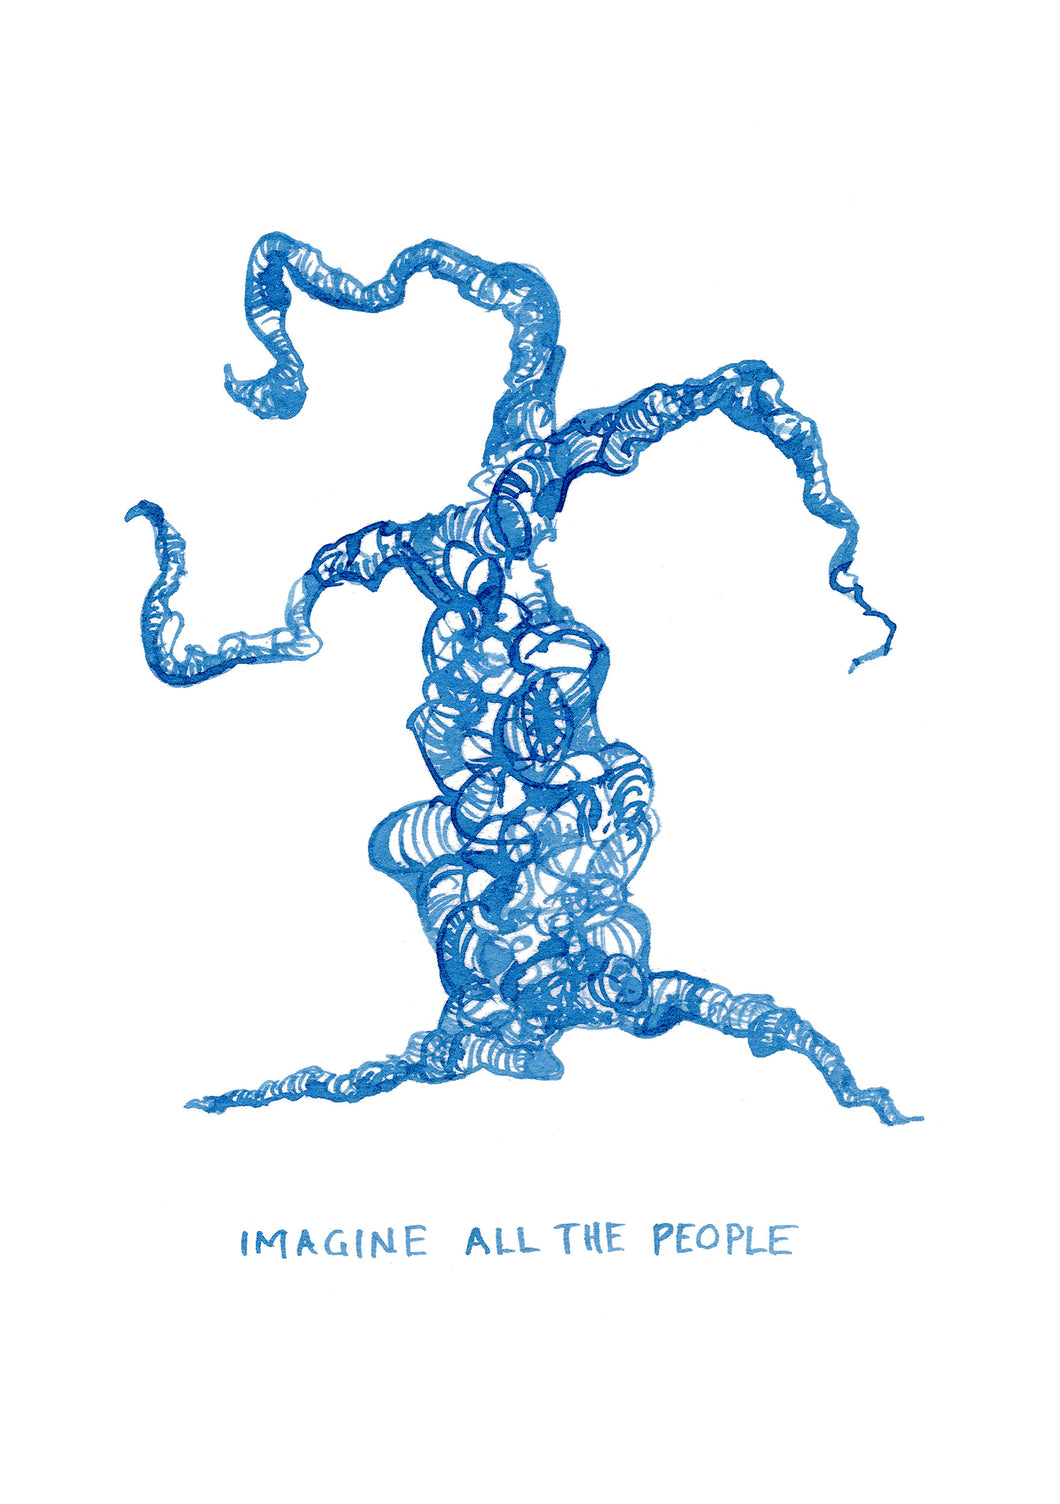 33. Imagine all the people